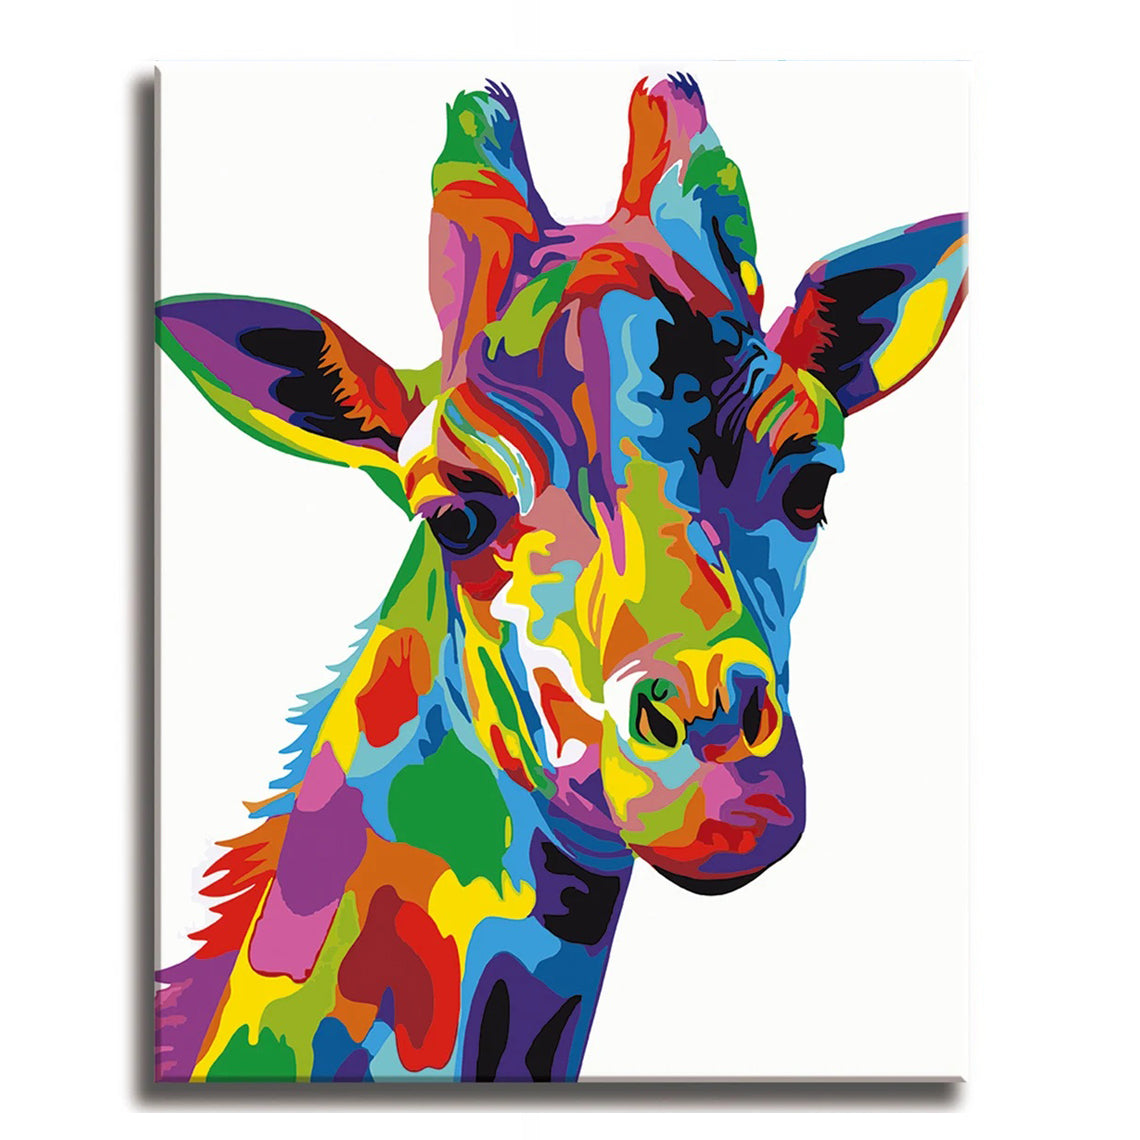 Colorful Giraffe- Paint by Numbers Kit for Adults DIY Oil Painting Kit on Canvas